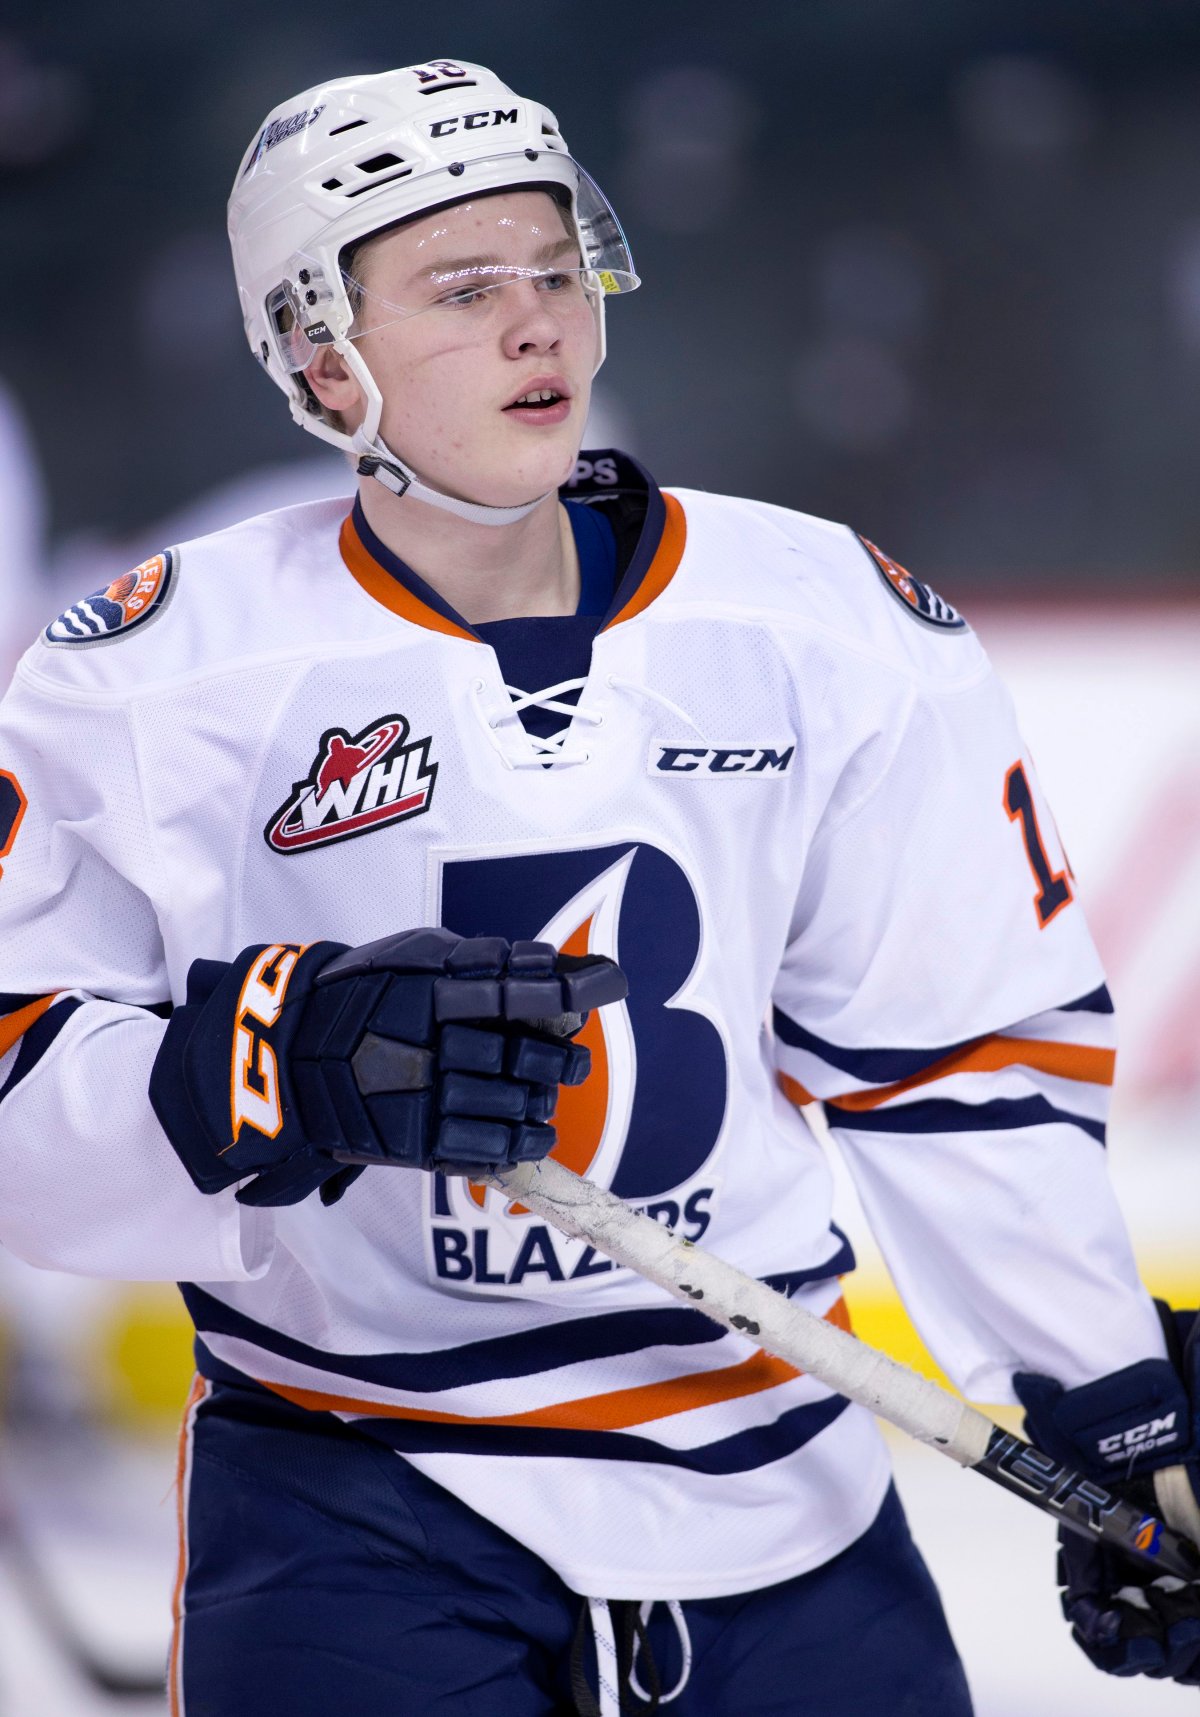 From backyard rink to Flames' first-rounder, meet Connor Zary